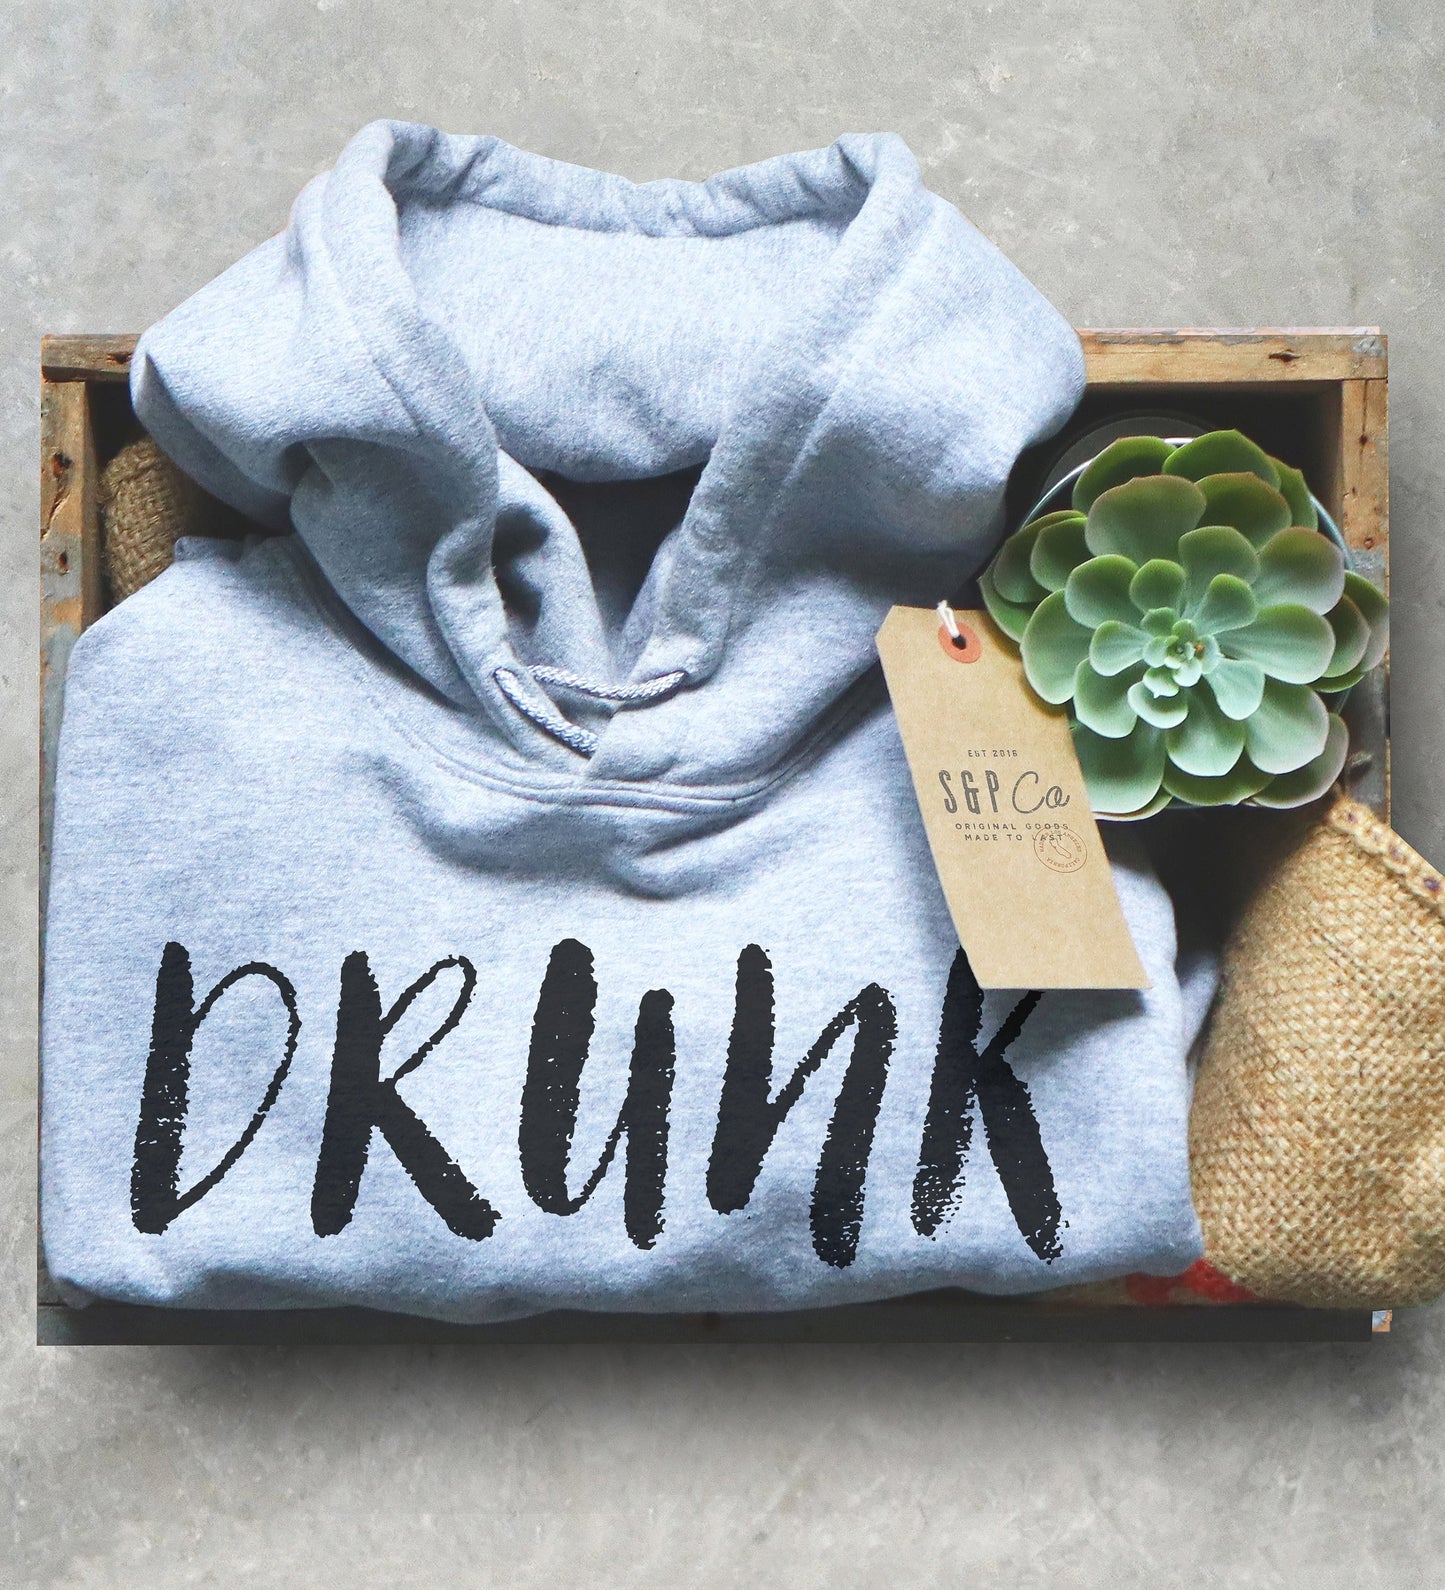 Drunk Mode On Hoodie - Drinking Shirts, Drunk Shirt, Funny Drinking Shirt, Drinking Team Shirts, Bachelorette Shirt, Bachelor Party